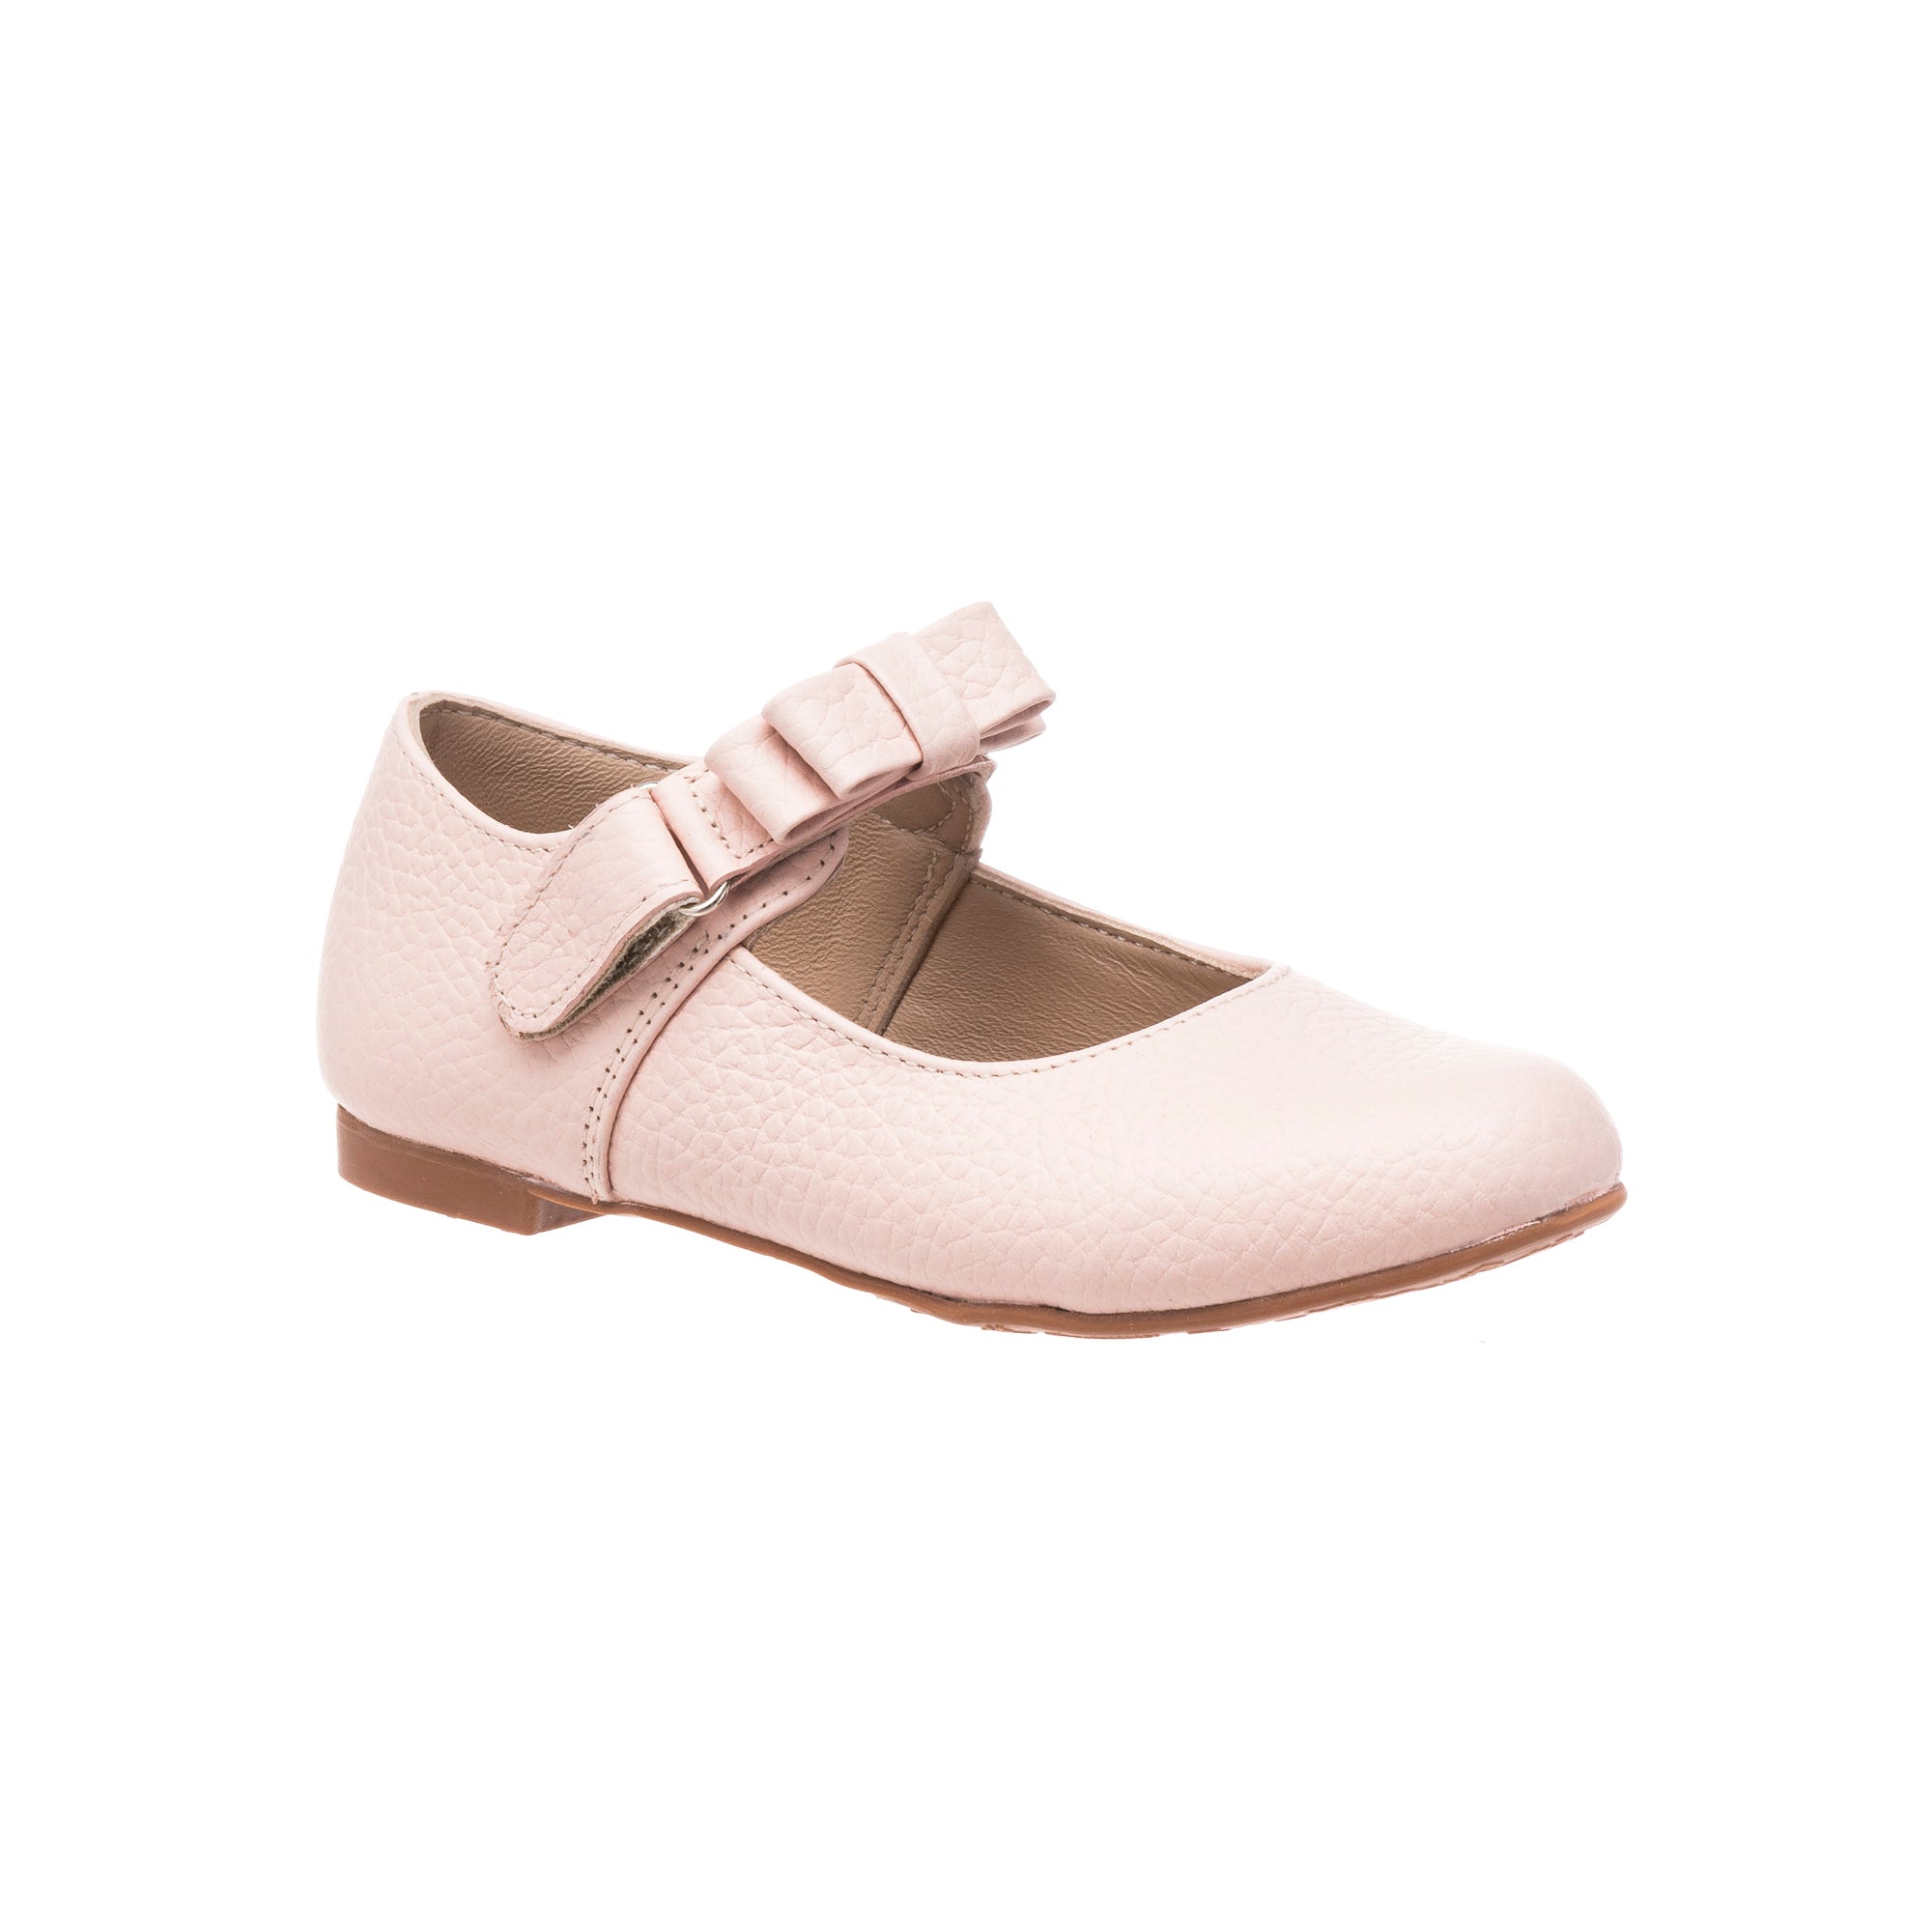 classic leather Mary Janes for girls and toddlers for the holidays